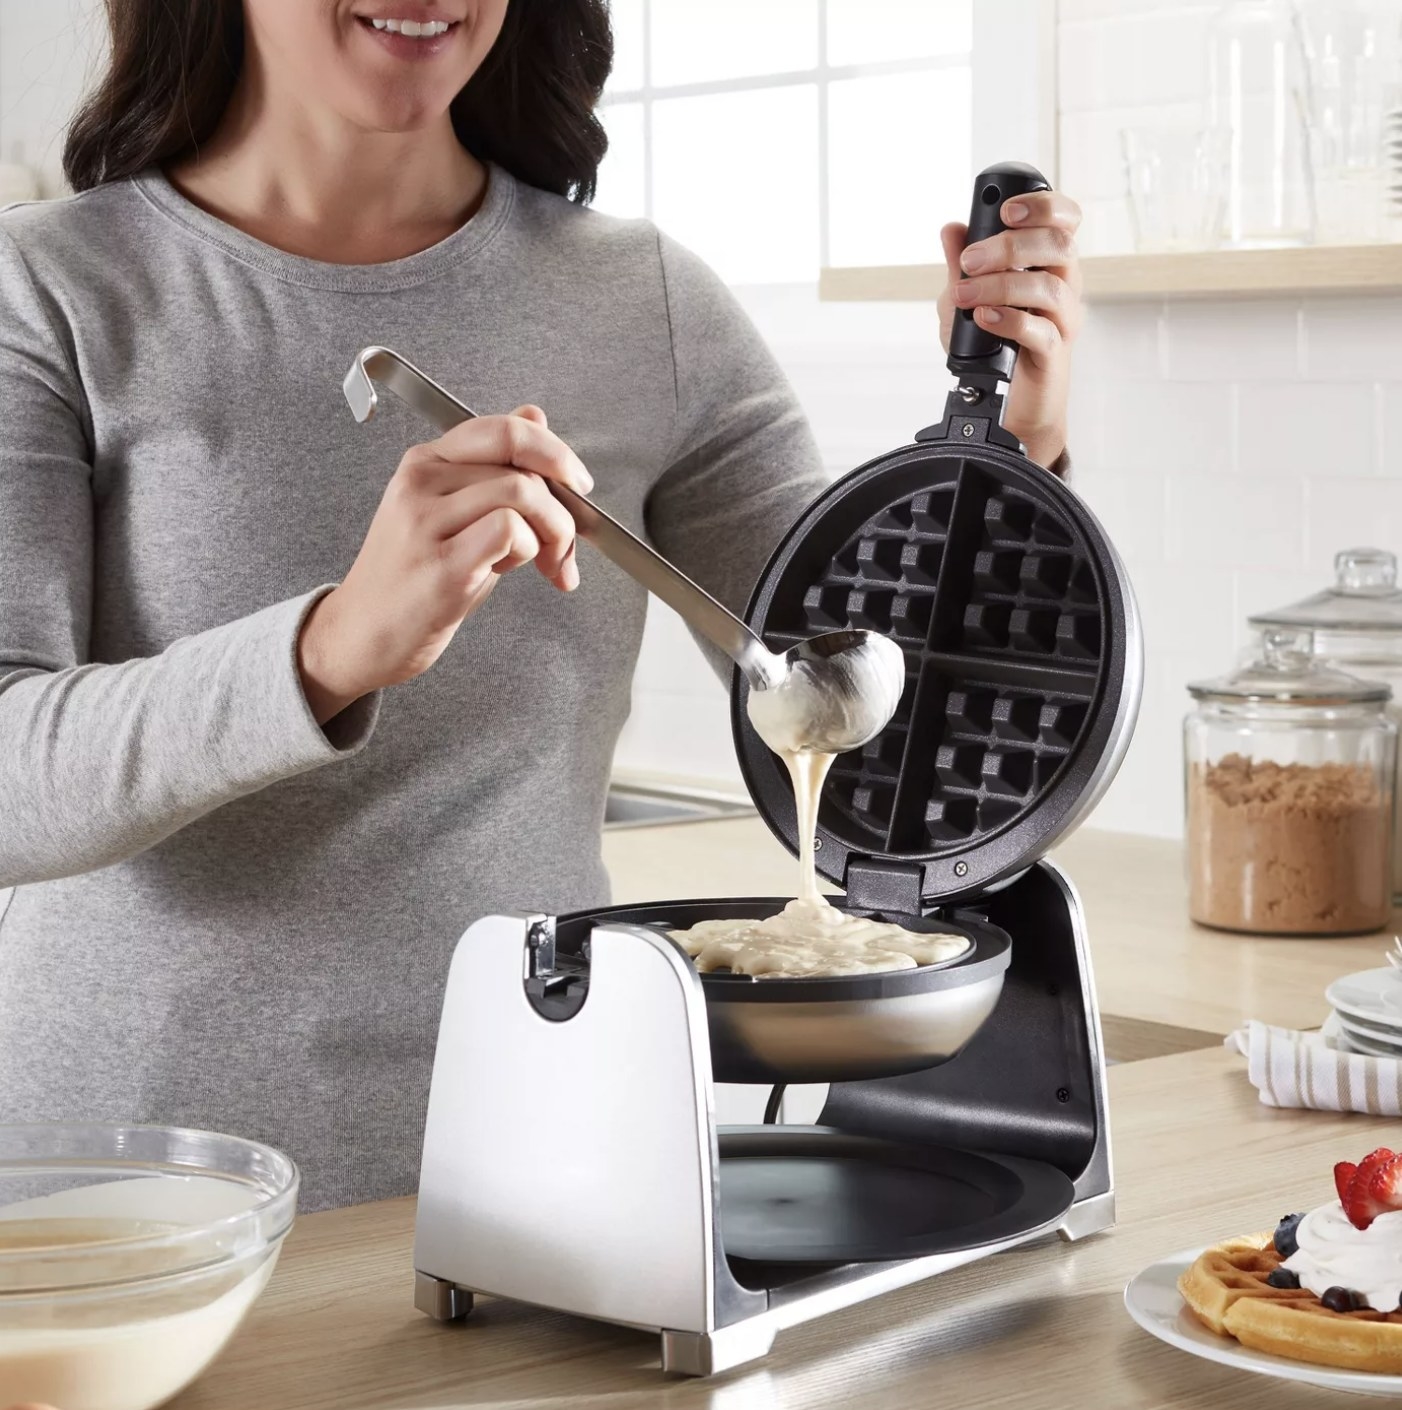 Model is pouring the batter into a waffle maker